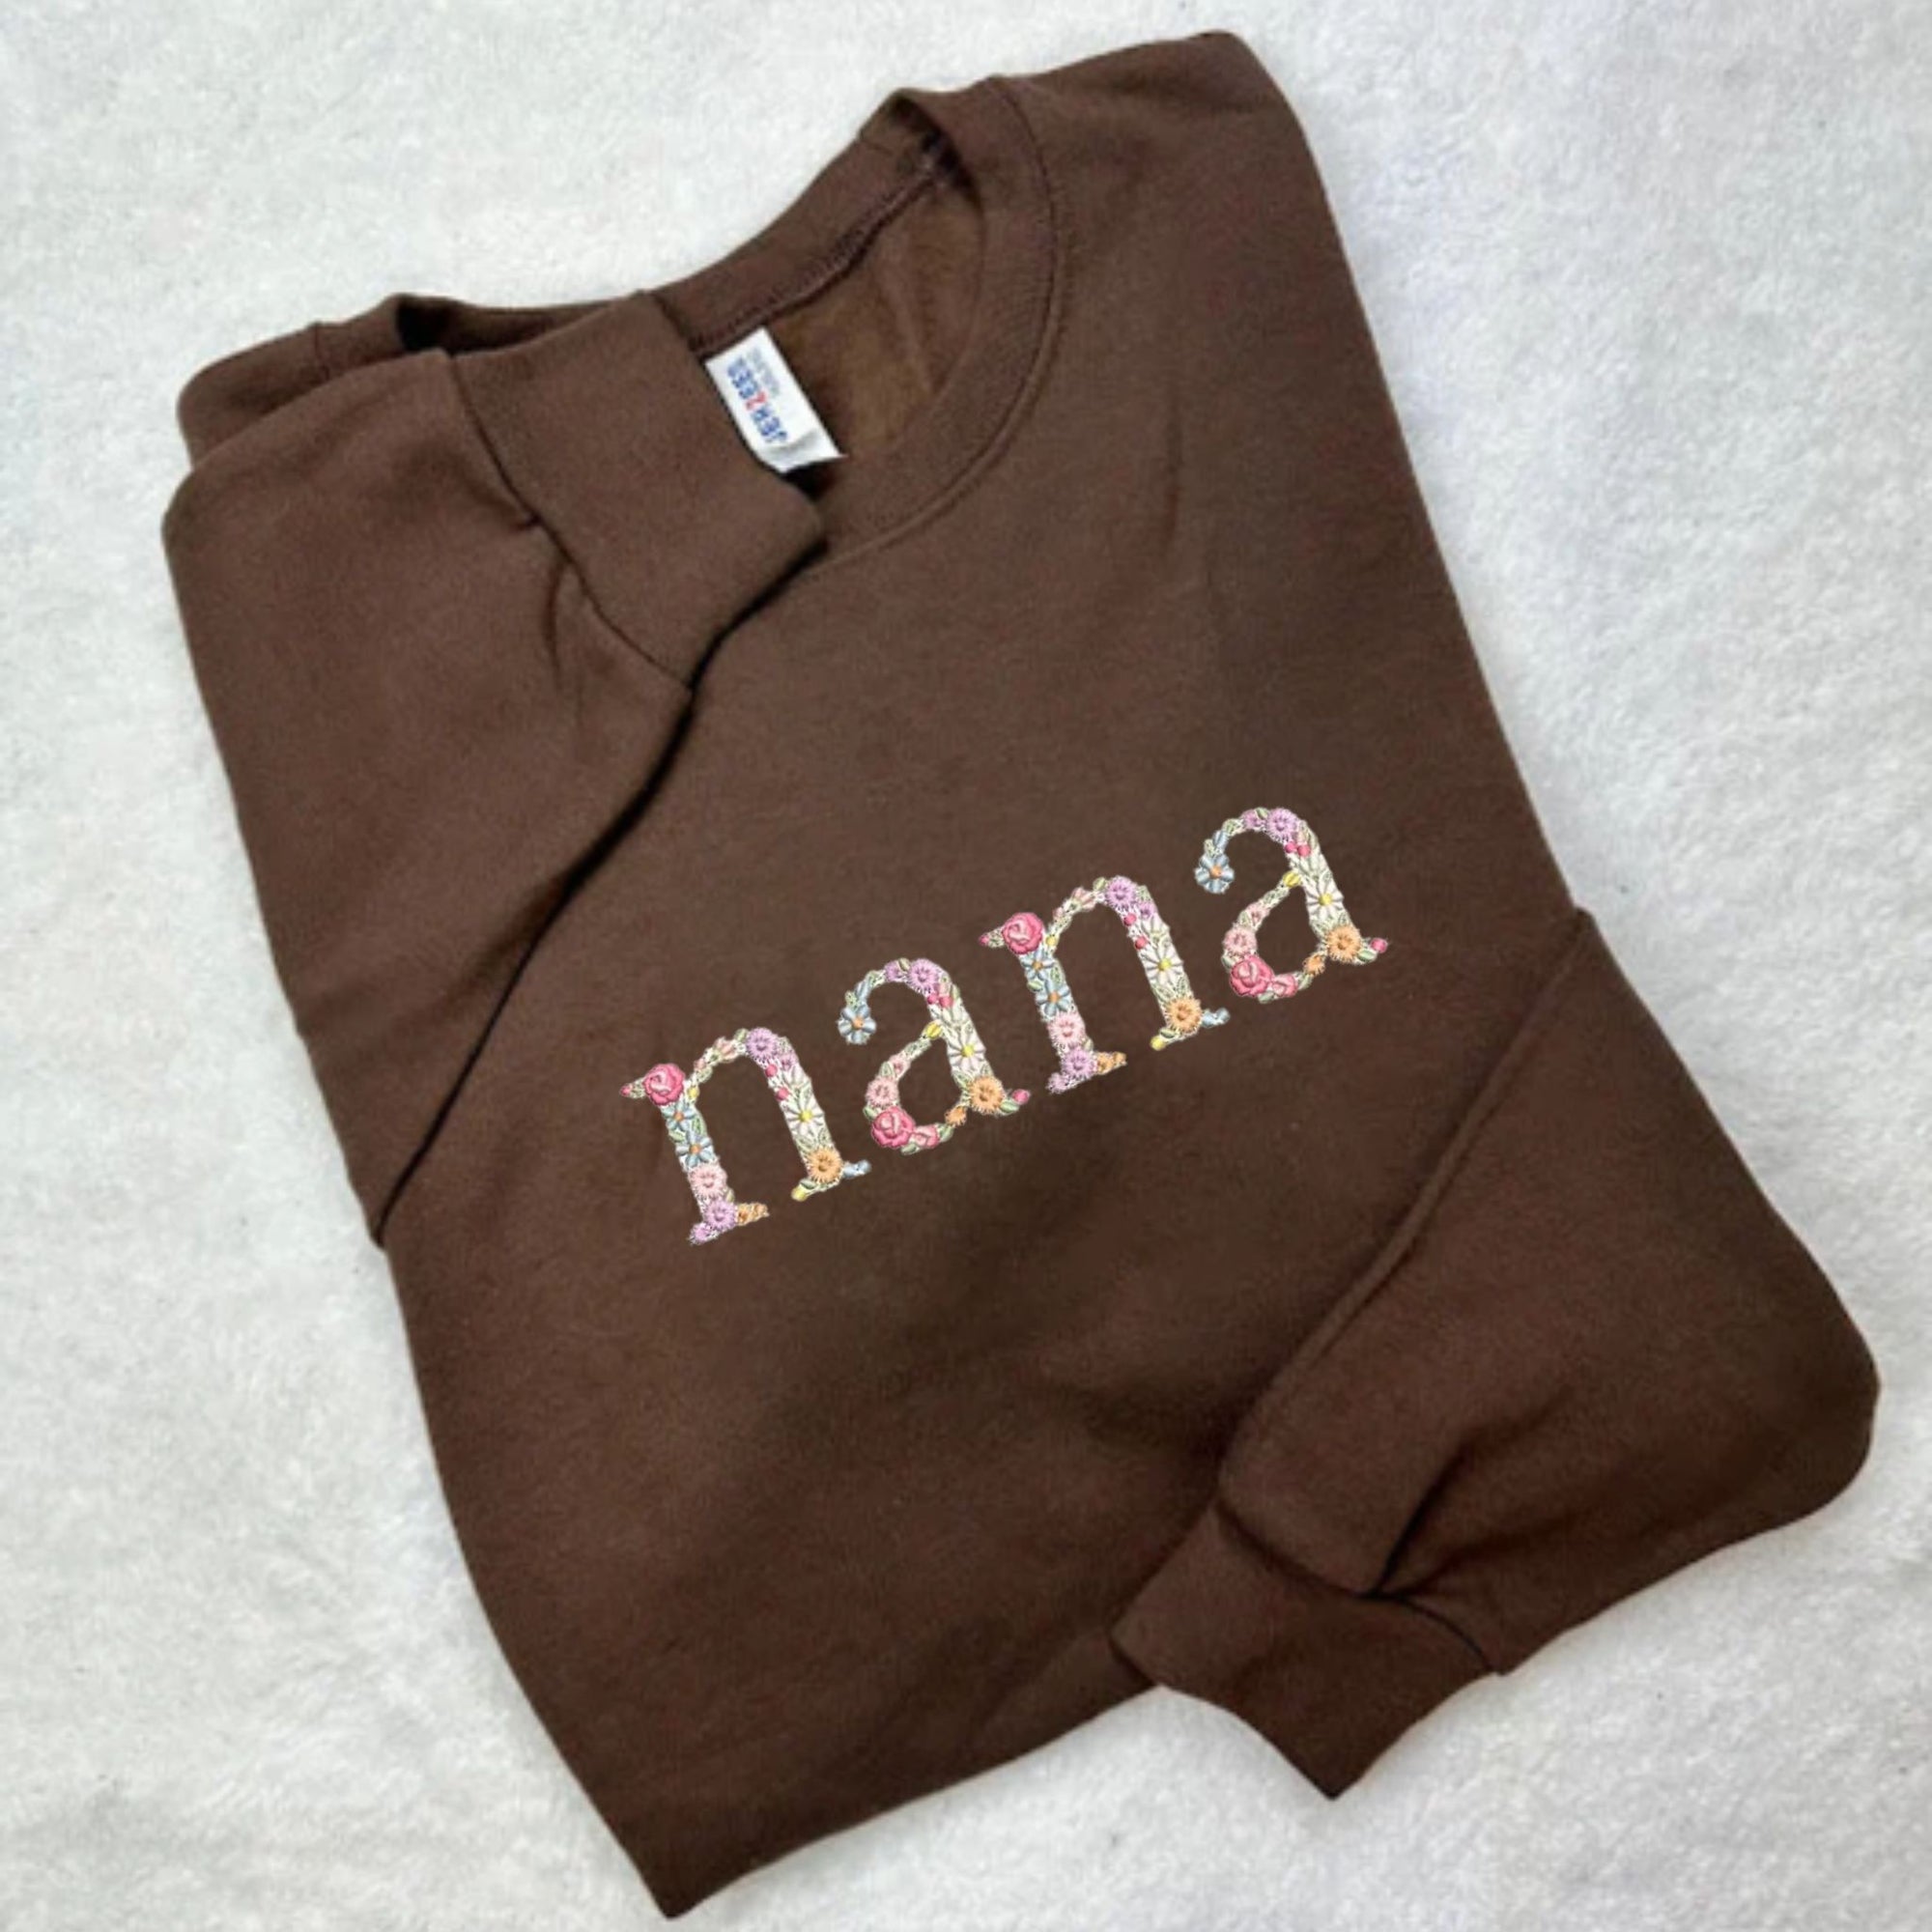 Embroidered Floral Nana Sweatshirt, Personalized Crewneck with Initial On Sleeve, Good Nana Gift Ideas